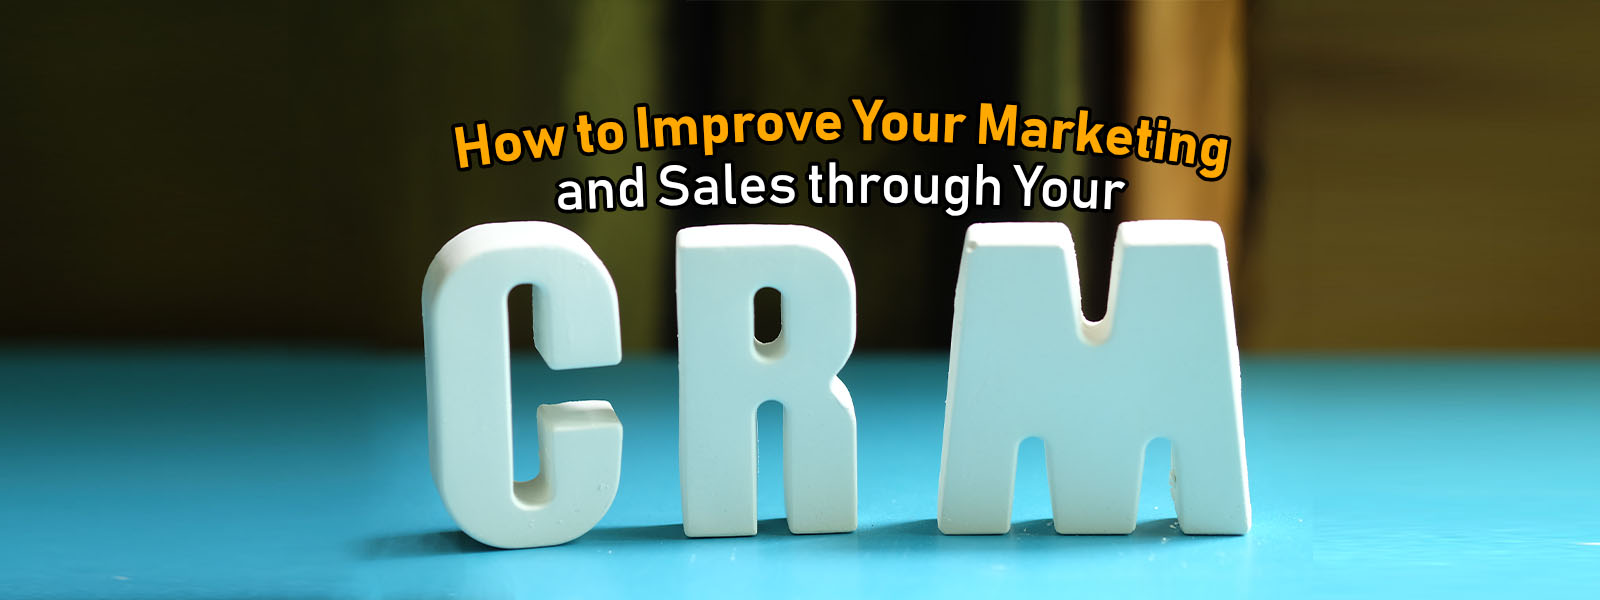 how to improve your marketing and sales through crm